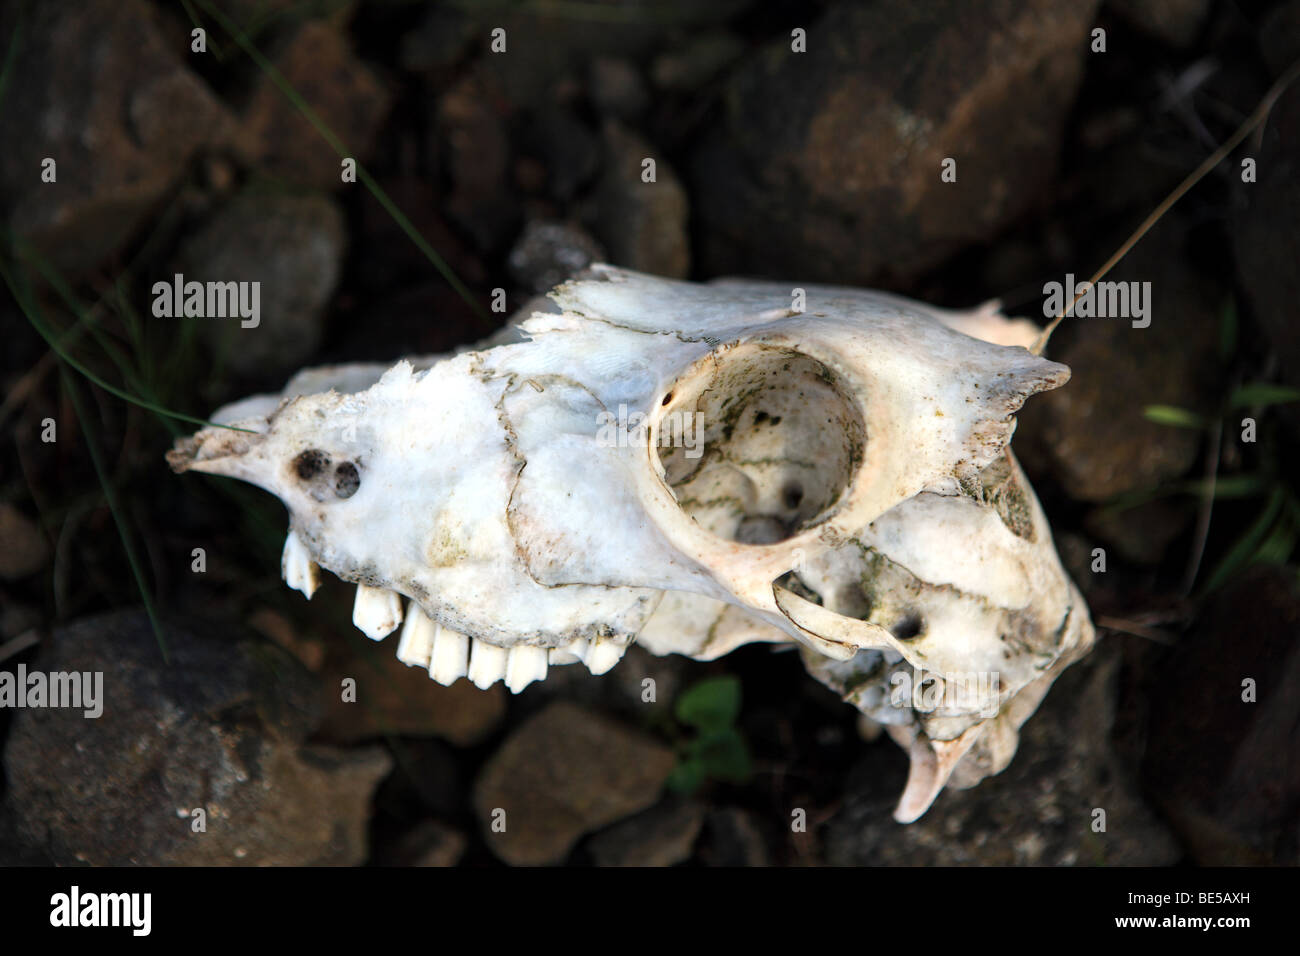 Part of a Sheep's skull with lower jaw and 'Roman nose' missing Stock Photo